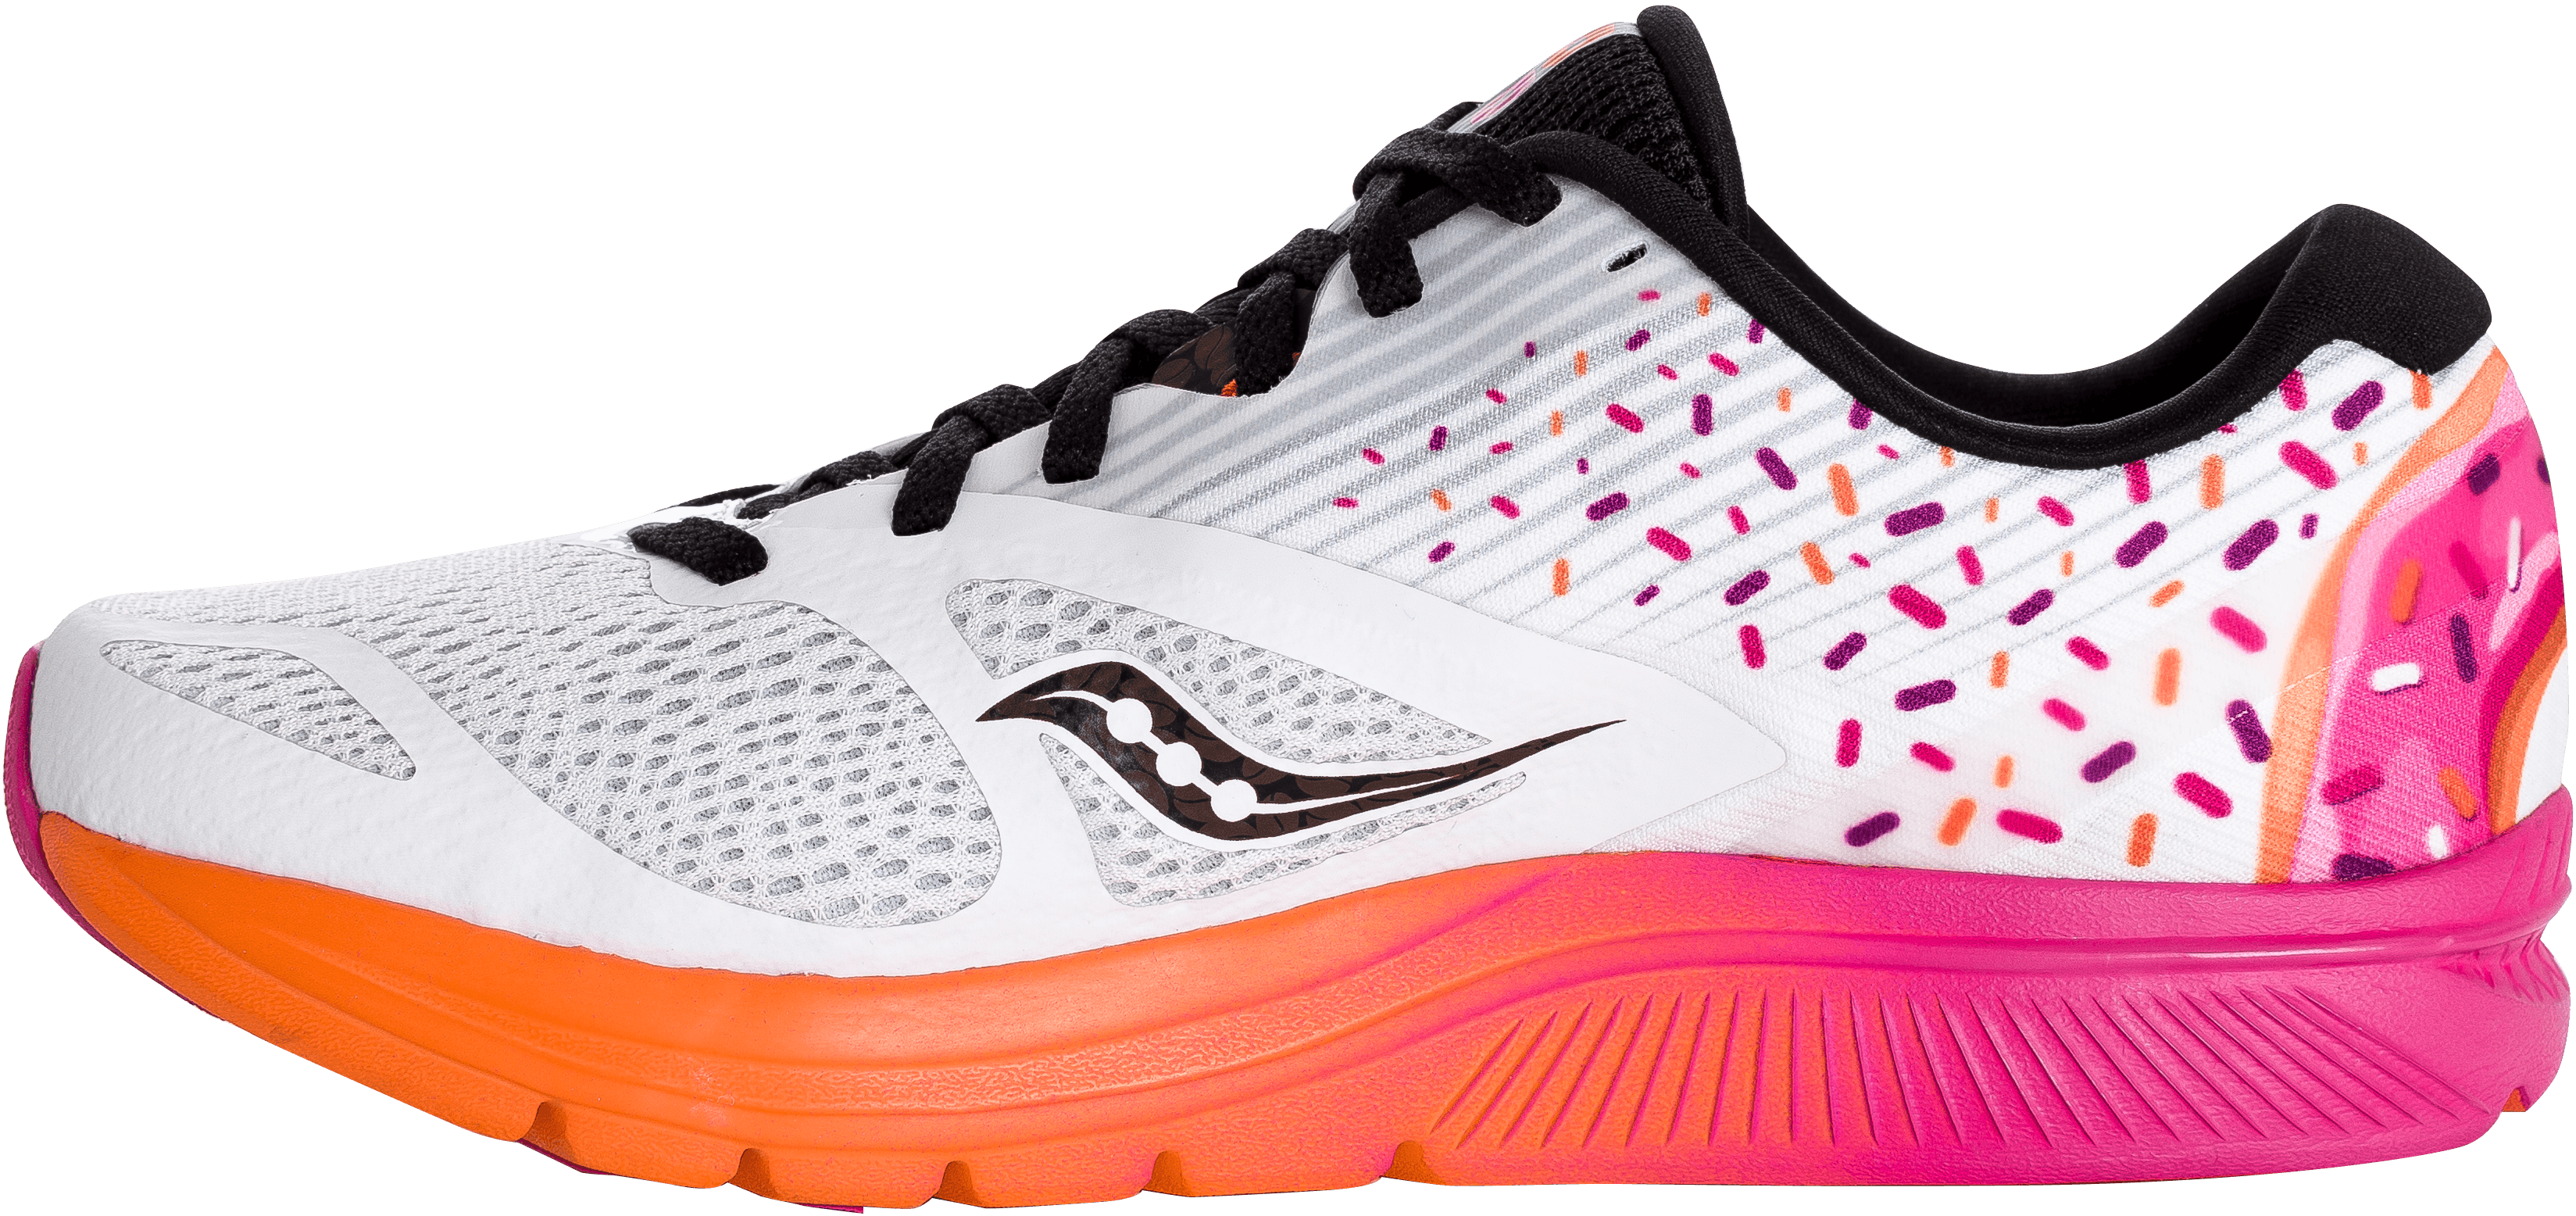 saucony dunkin donuts